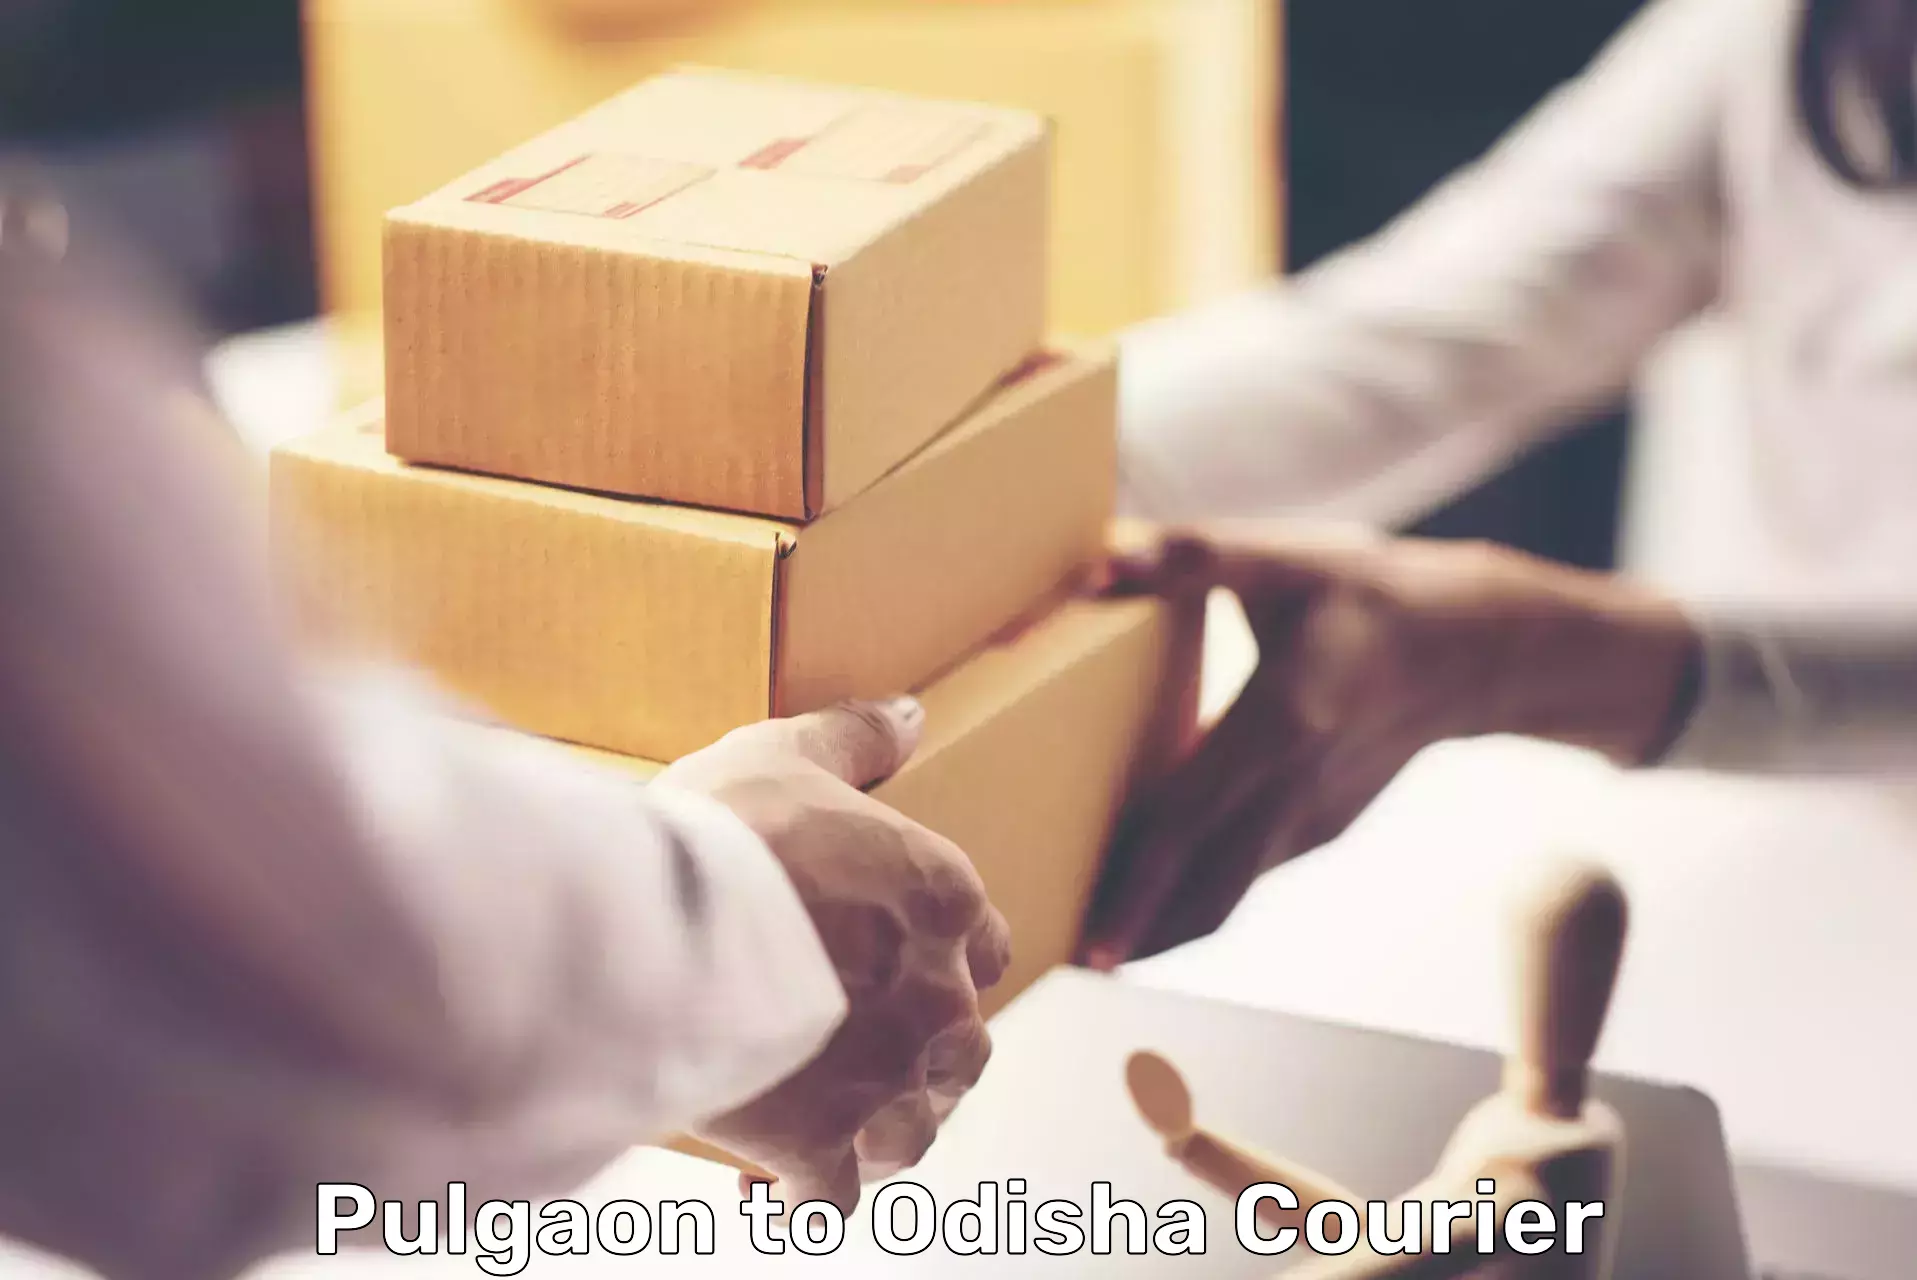 Next-day delivery options Pulgaon to Sambalpur